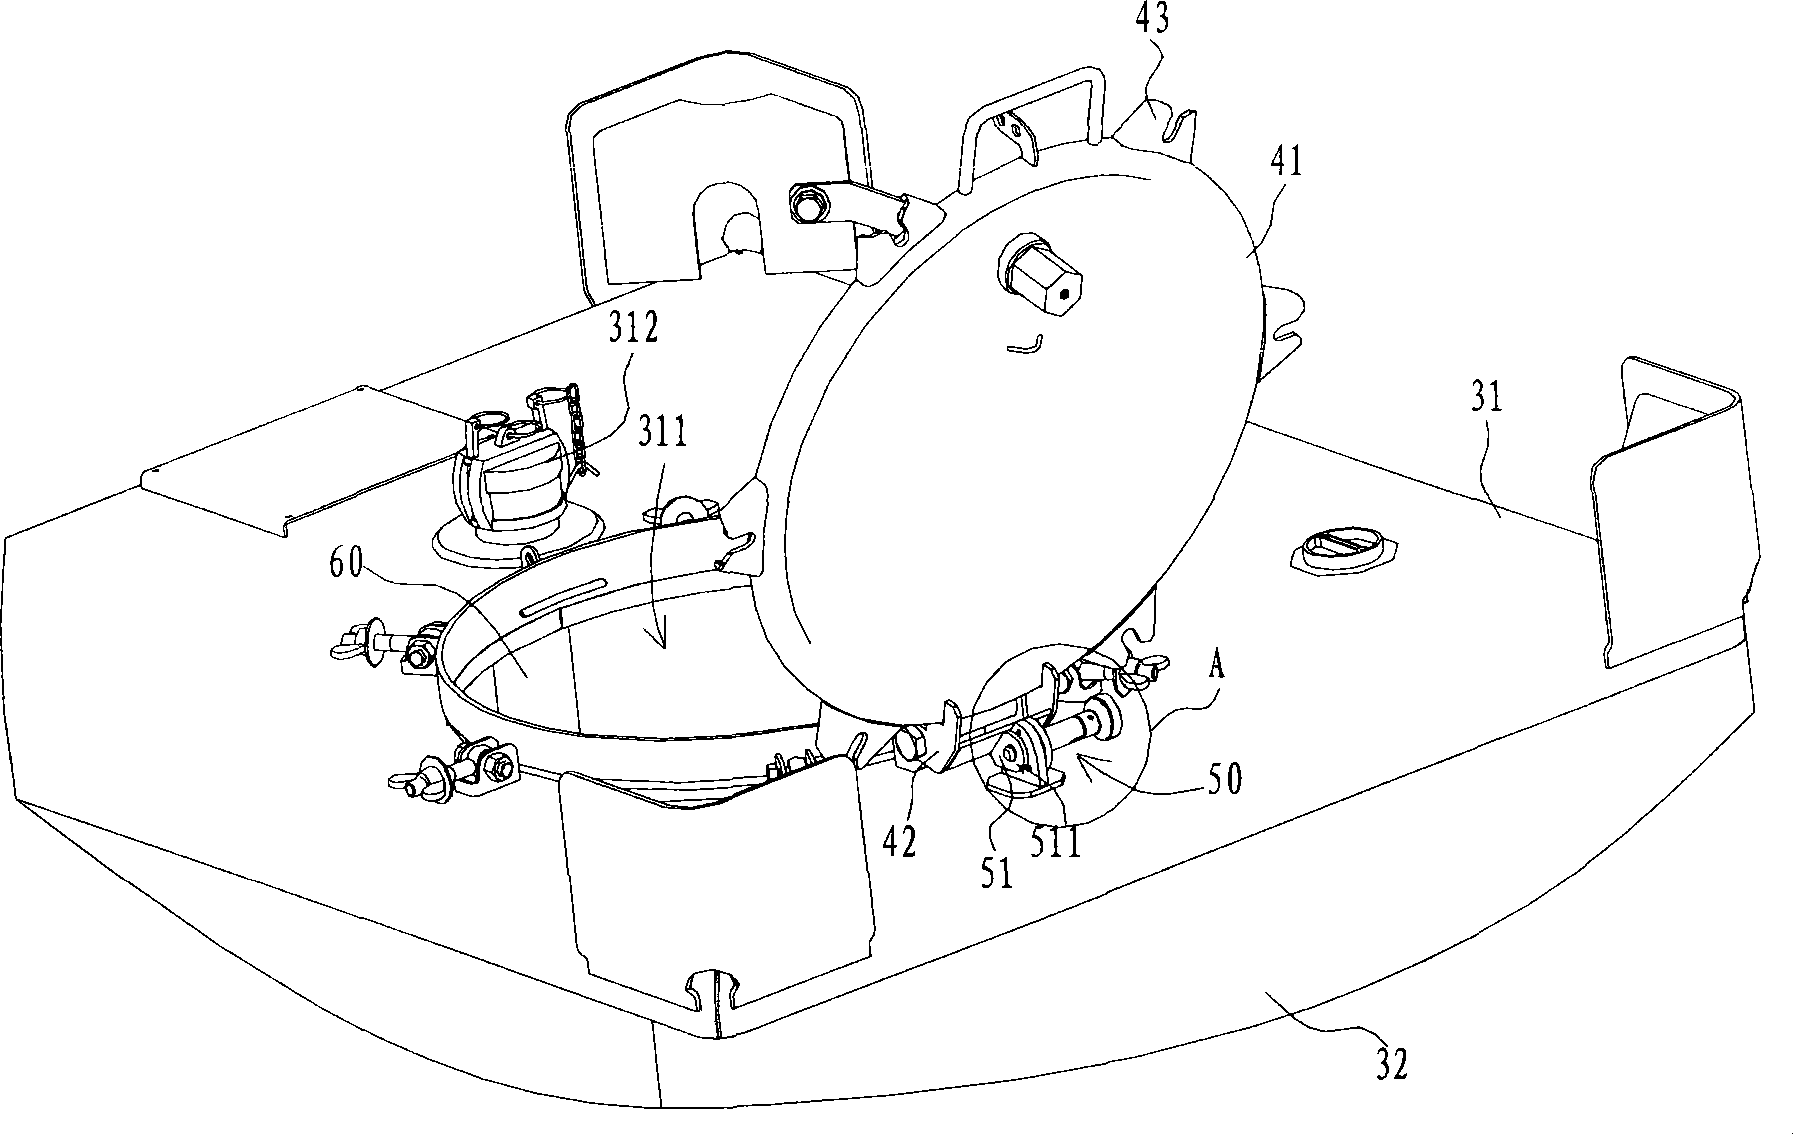 Manhole cover with positioning apparatus and can-type tray box equipped therewith